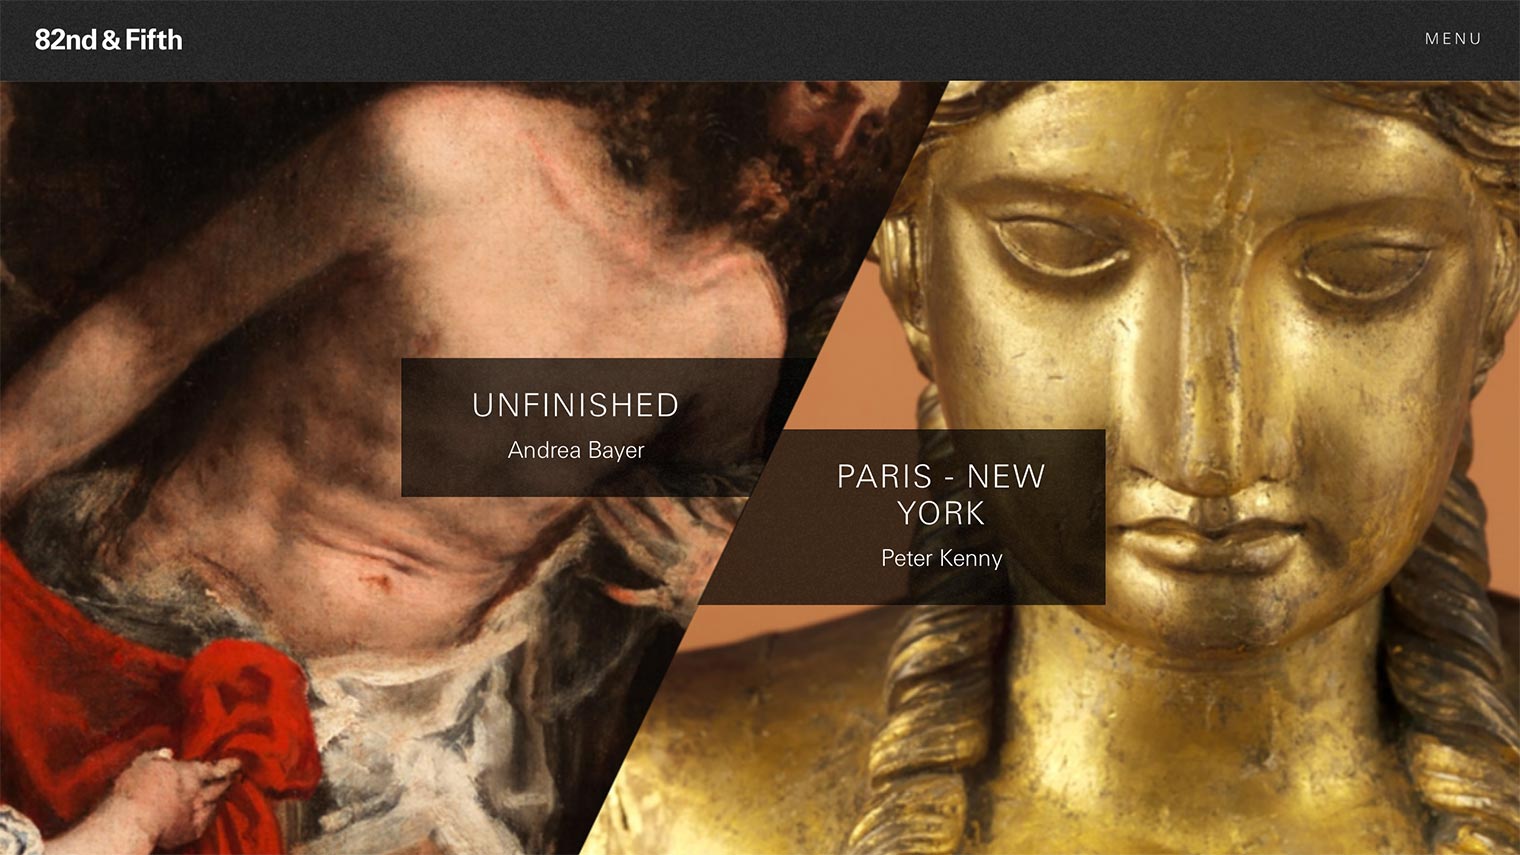 A screenshot of 82nd and 5th, showing two works of art side by side